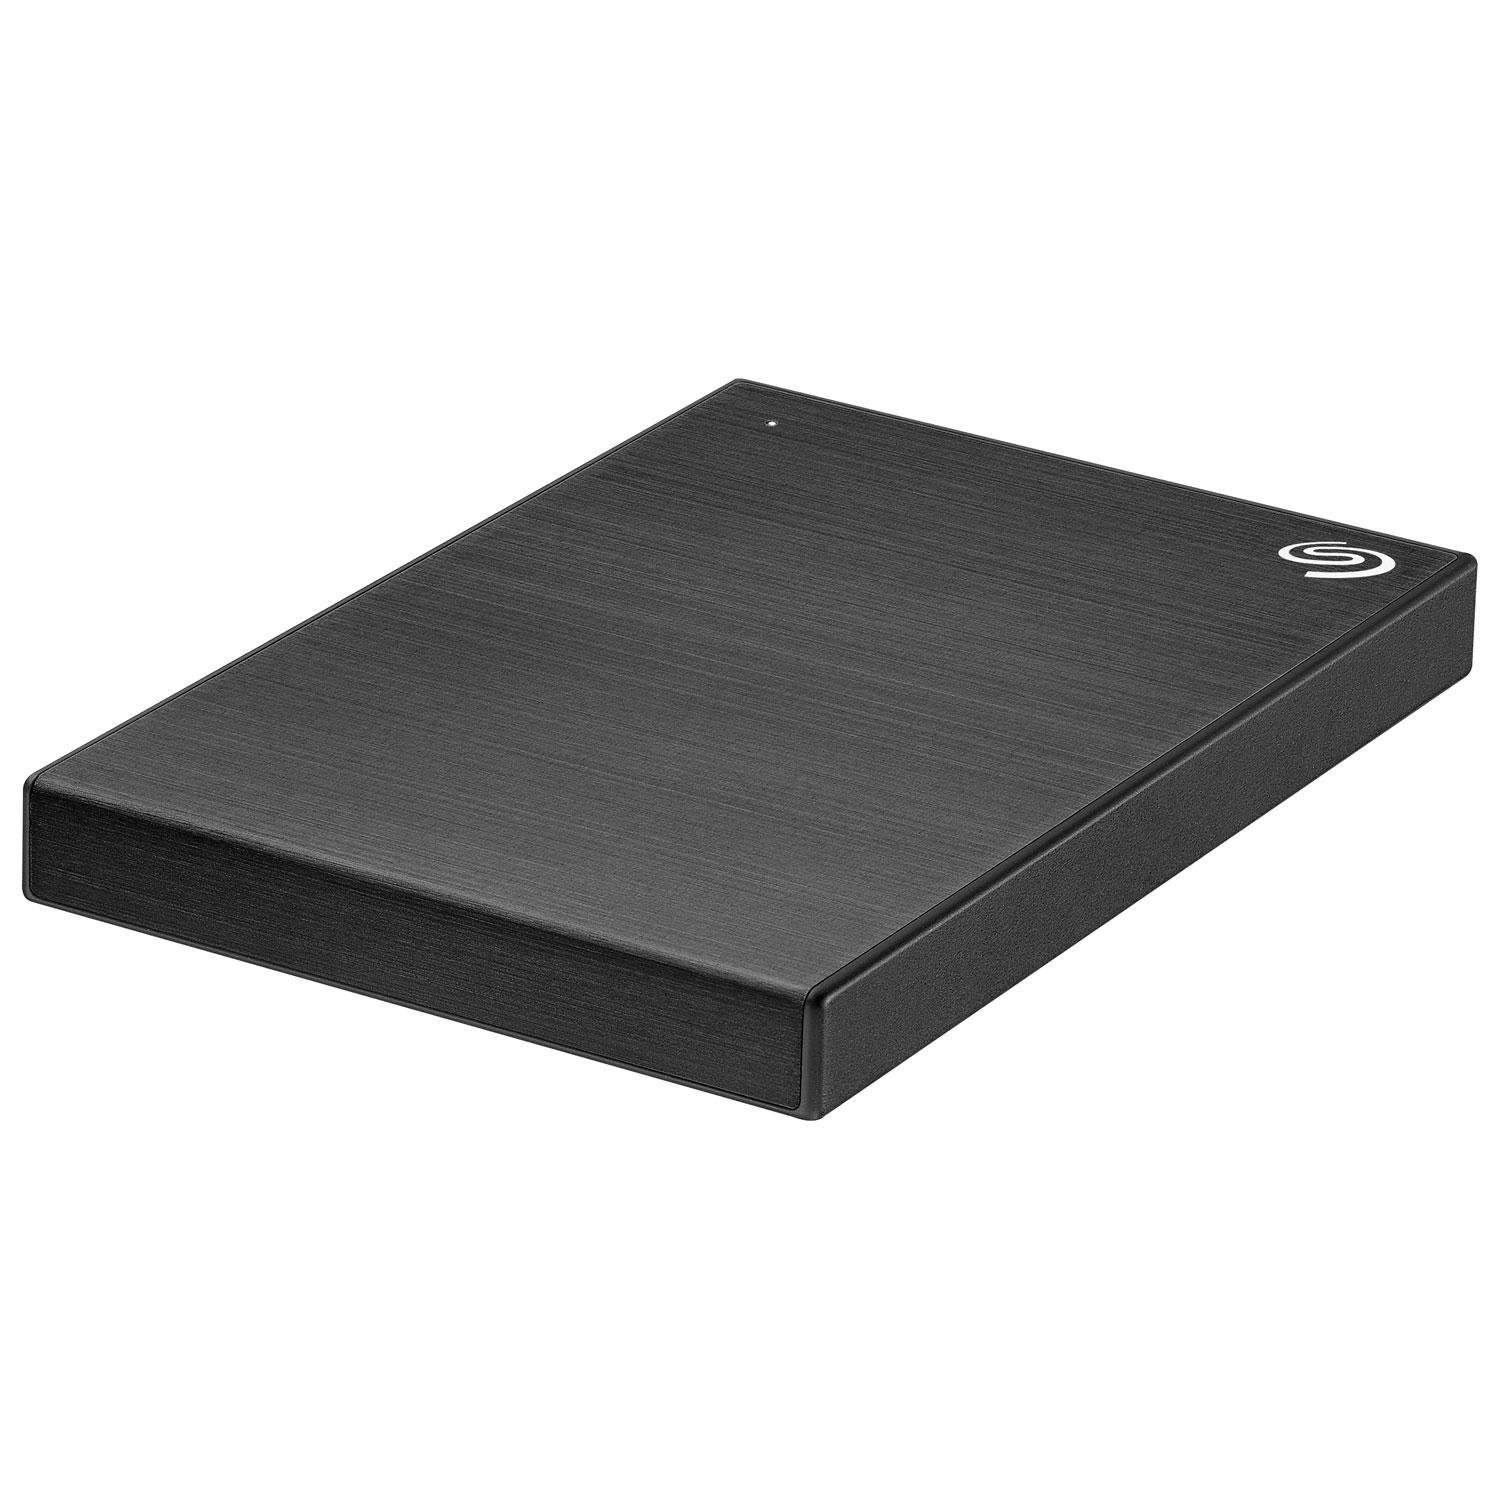 Seagate One Touch 1TB USB 3.0 Portable External Hard Drive